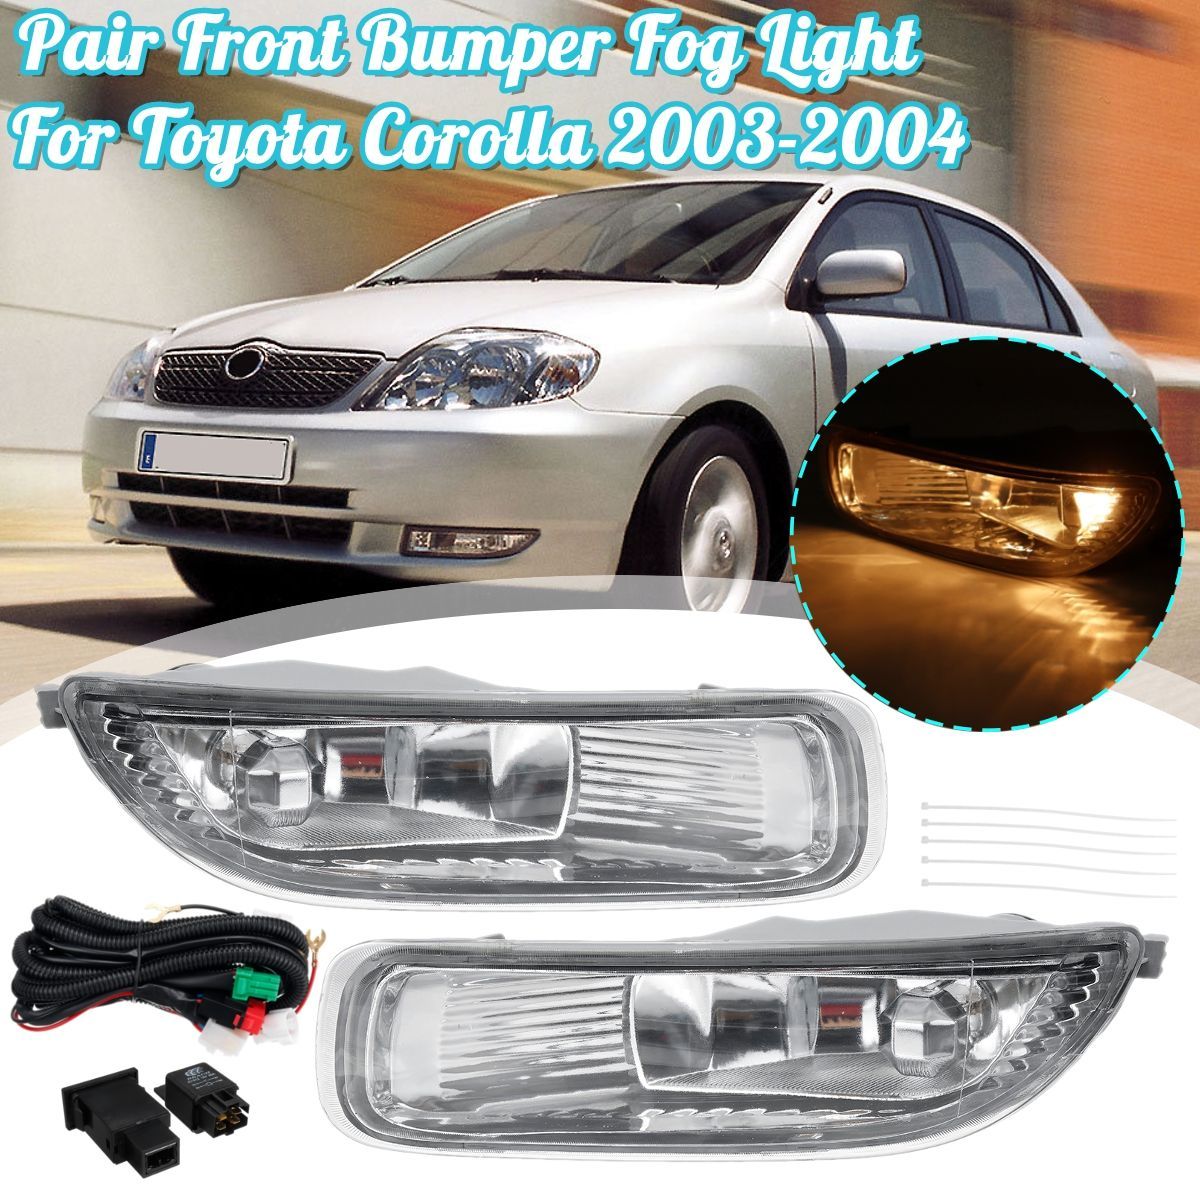 Pair-Front-Bumper-Fog-Light-Lamp-with-Bulb-Wire-Harness-Yellow-For-Toyota-Corolla-2003-2004-1709445